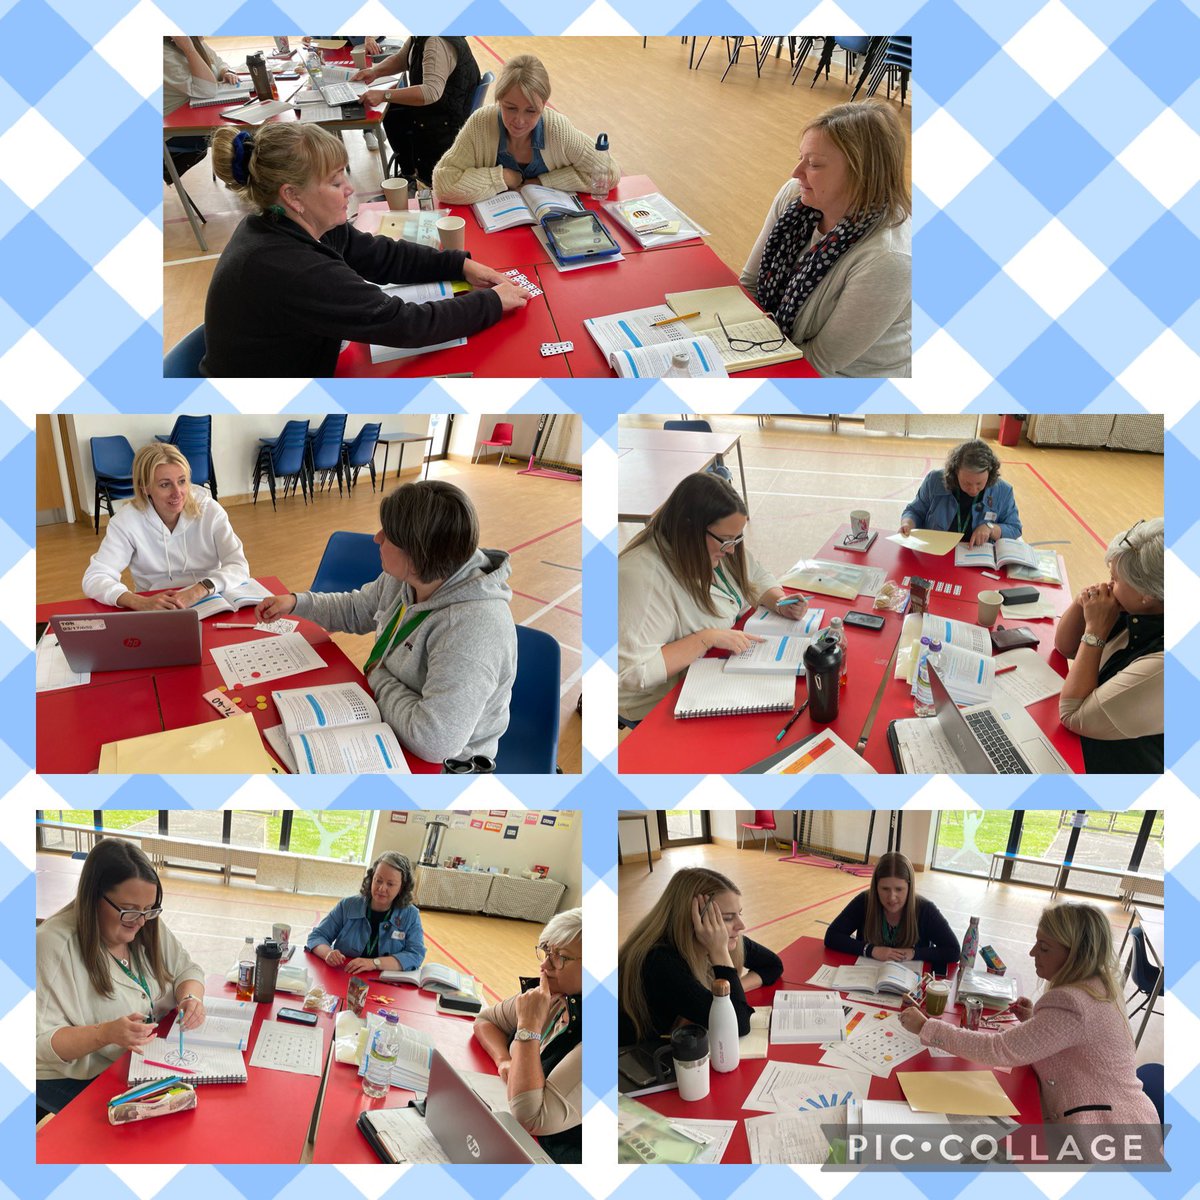 ‘Developing Number Knowledge’- Maths Recovery - Day 3 ‘Addition and Subtraction’ - thoughtful discussions on refining strategies and using correct notation @MathsRecoveryUK @WLmaths